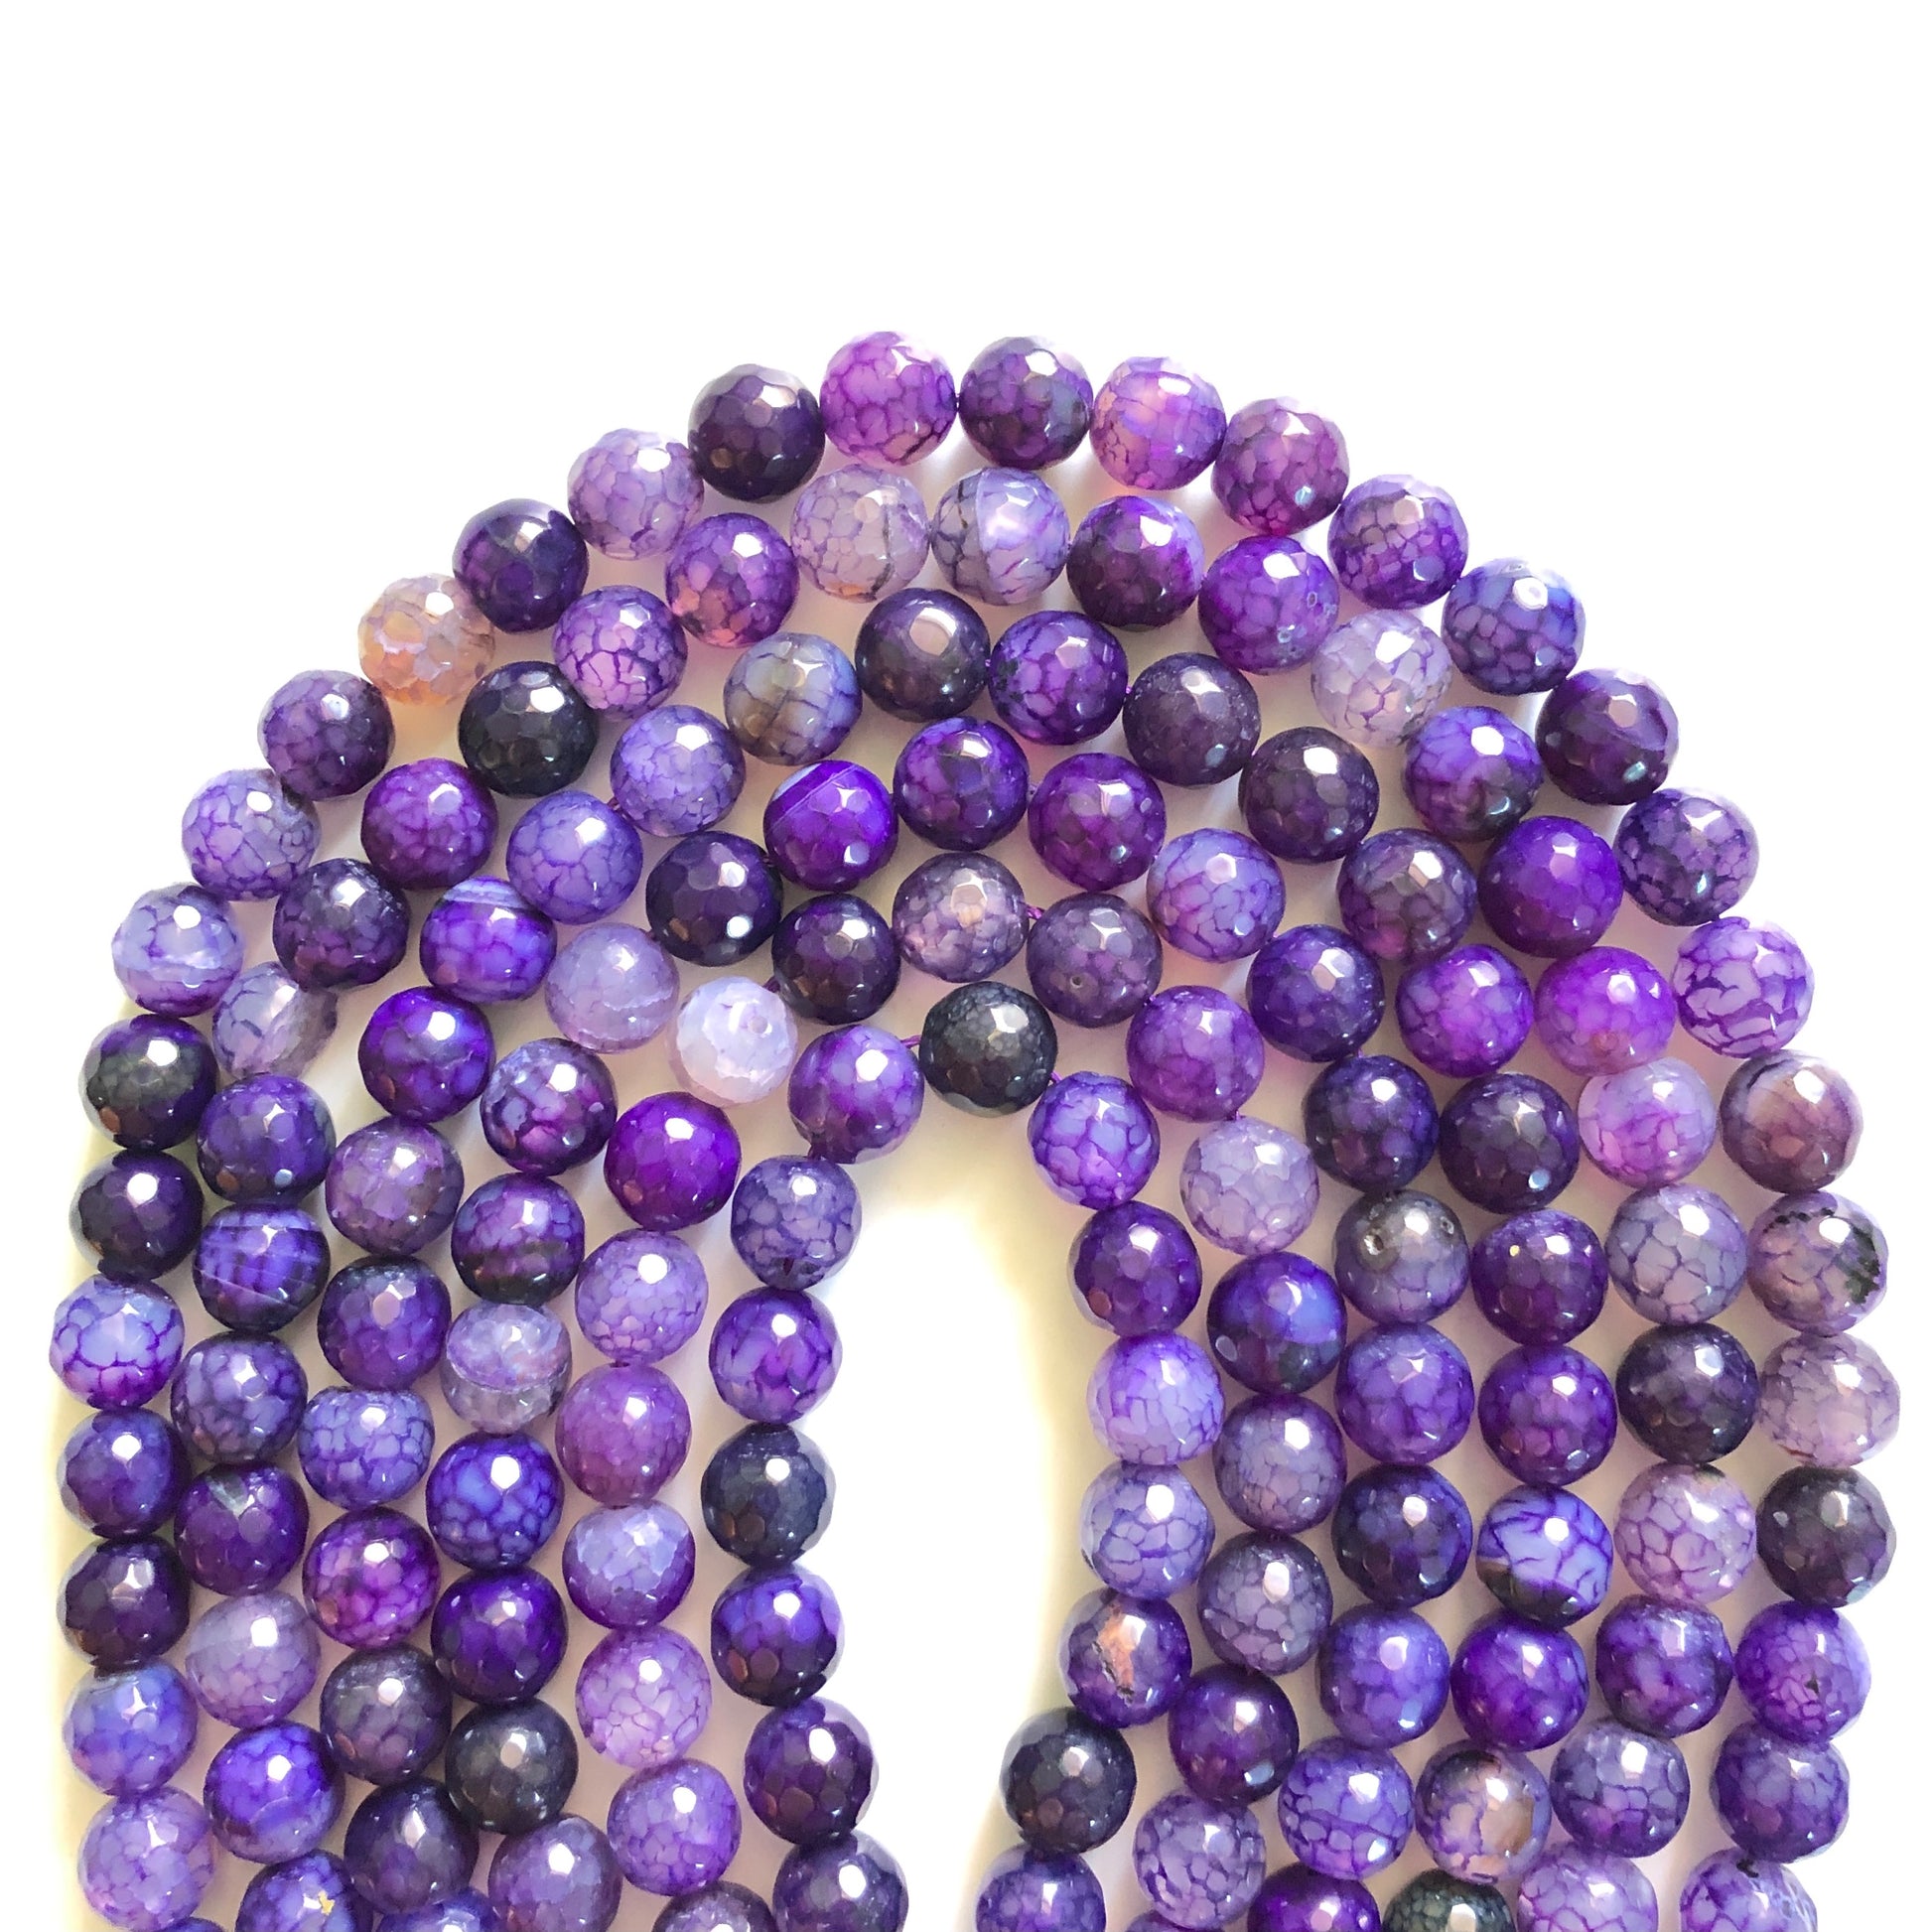 2 Strands/lot 10mm Purple Dragon Agate Faceted Stone Beads Stone Beads Faceted Agate Beads Charms Beads Beyond